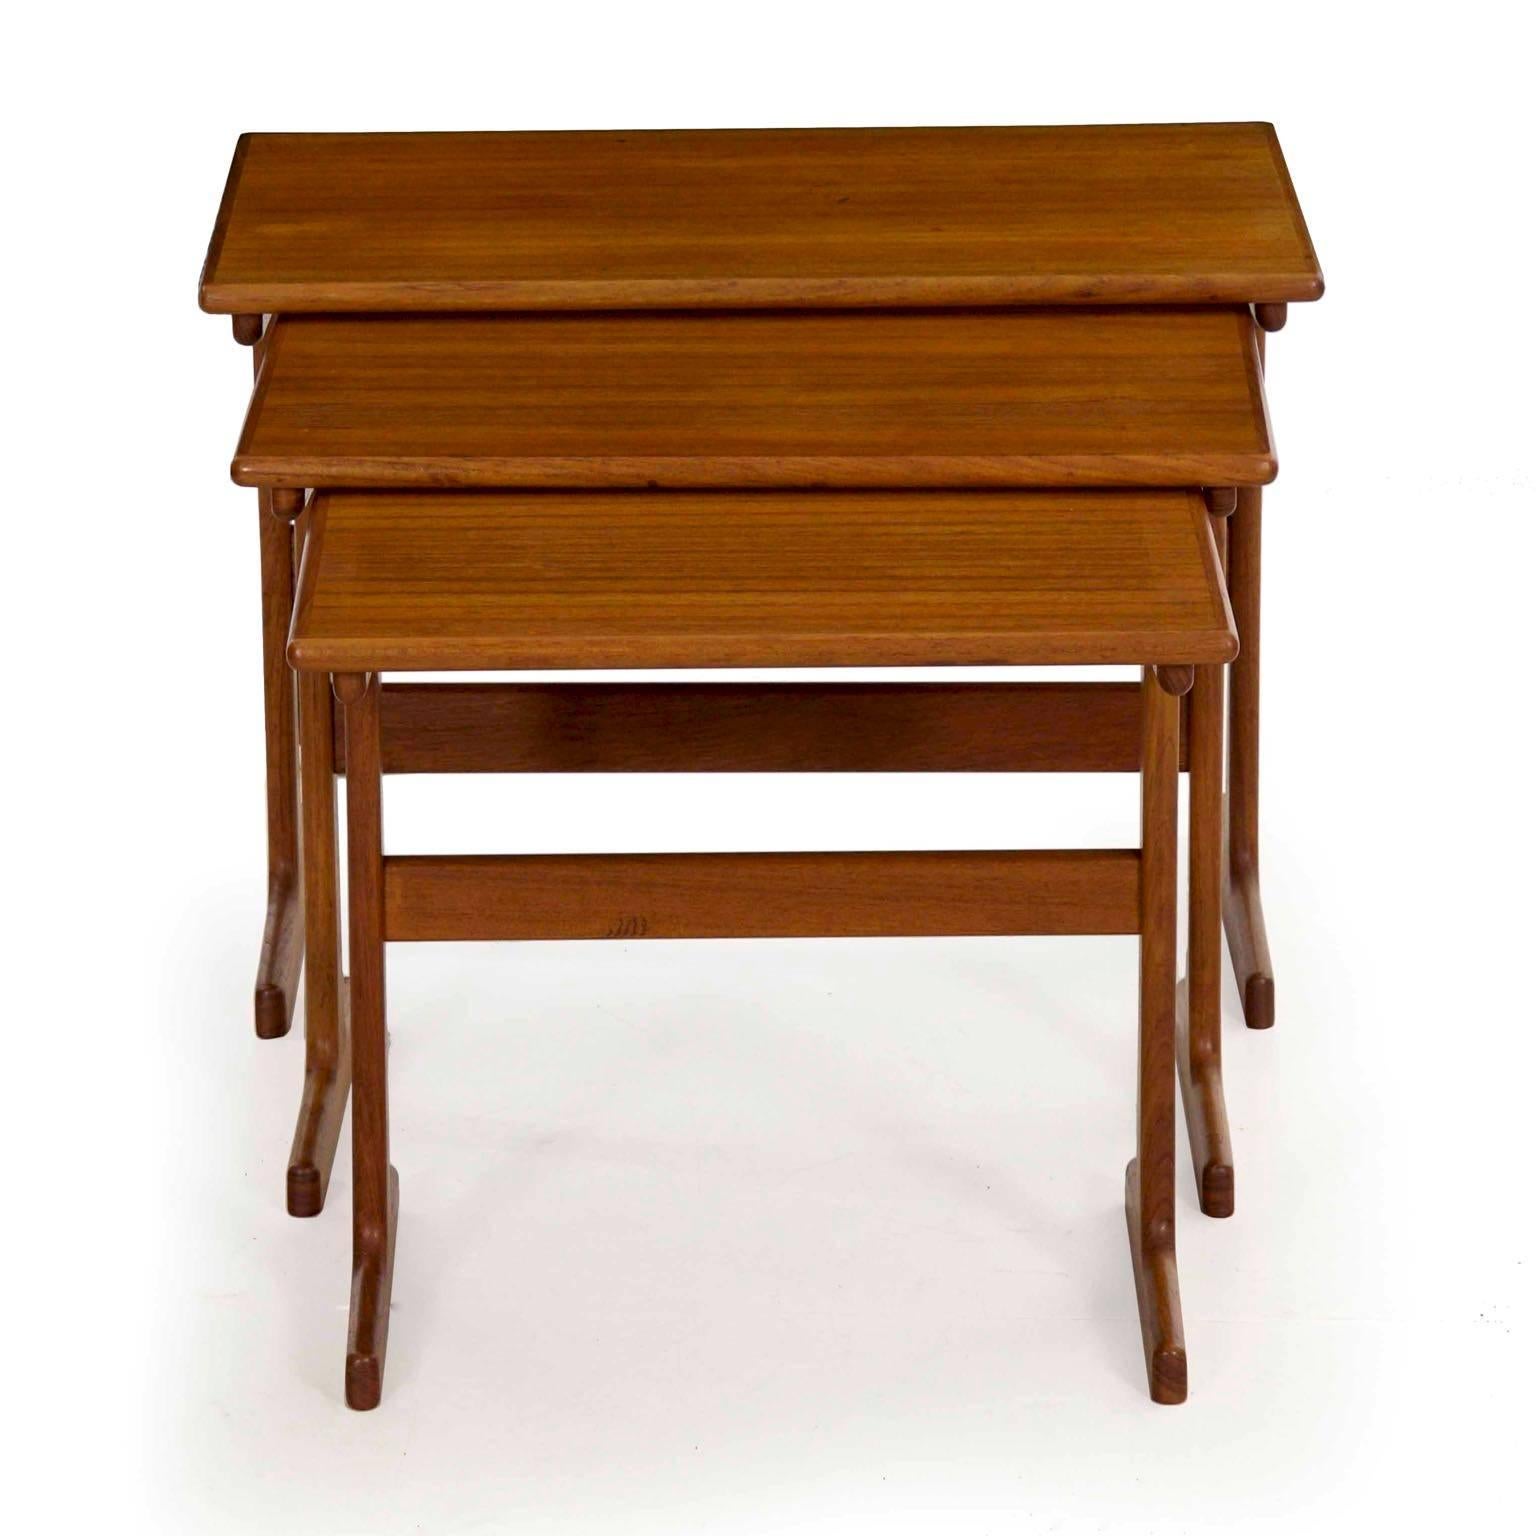 This is a very nice Danish Mid-Century Modern trio of nesting tables designed by Kai Kristiansen and executed by Vildbjerg Møbelfabrik in teak during the 1960s. The smallest table retains the brand to the underside “VM Made in Denmark”. They are an